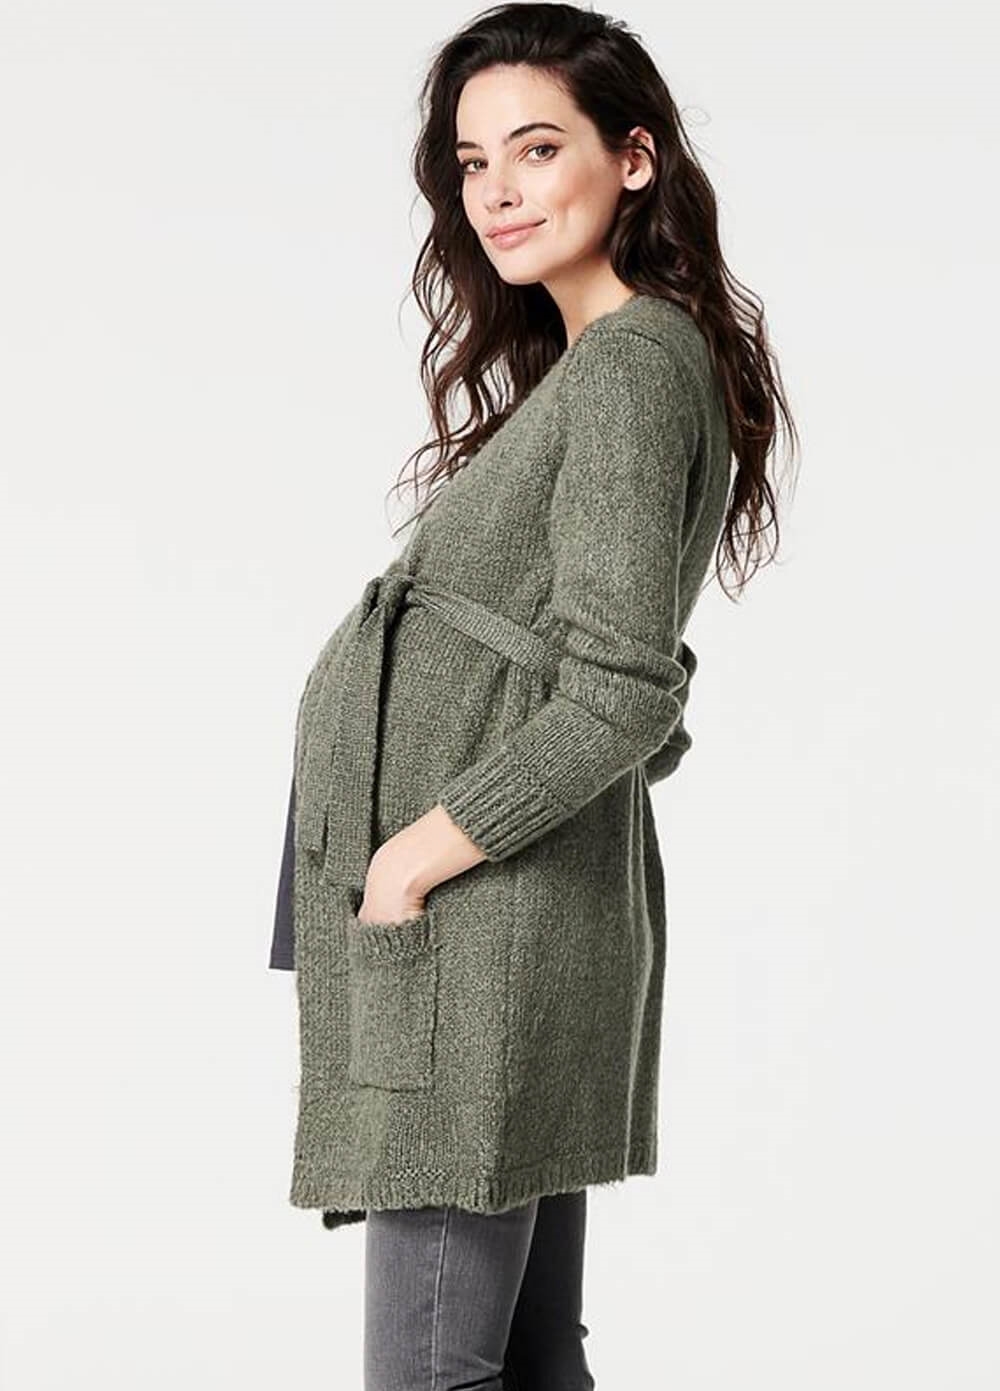 Supermom - Ivy Green Maternity Knit Cardigan | Queen Bee